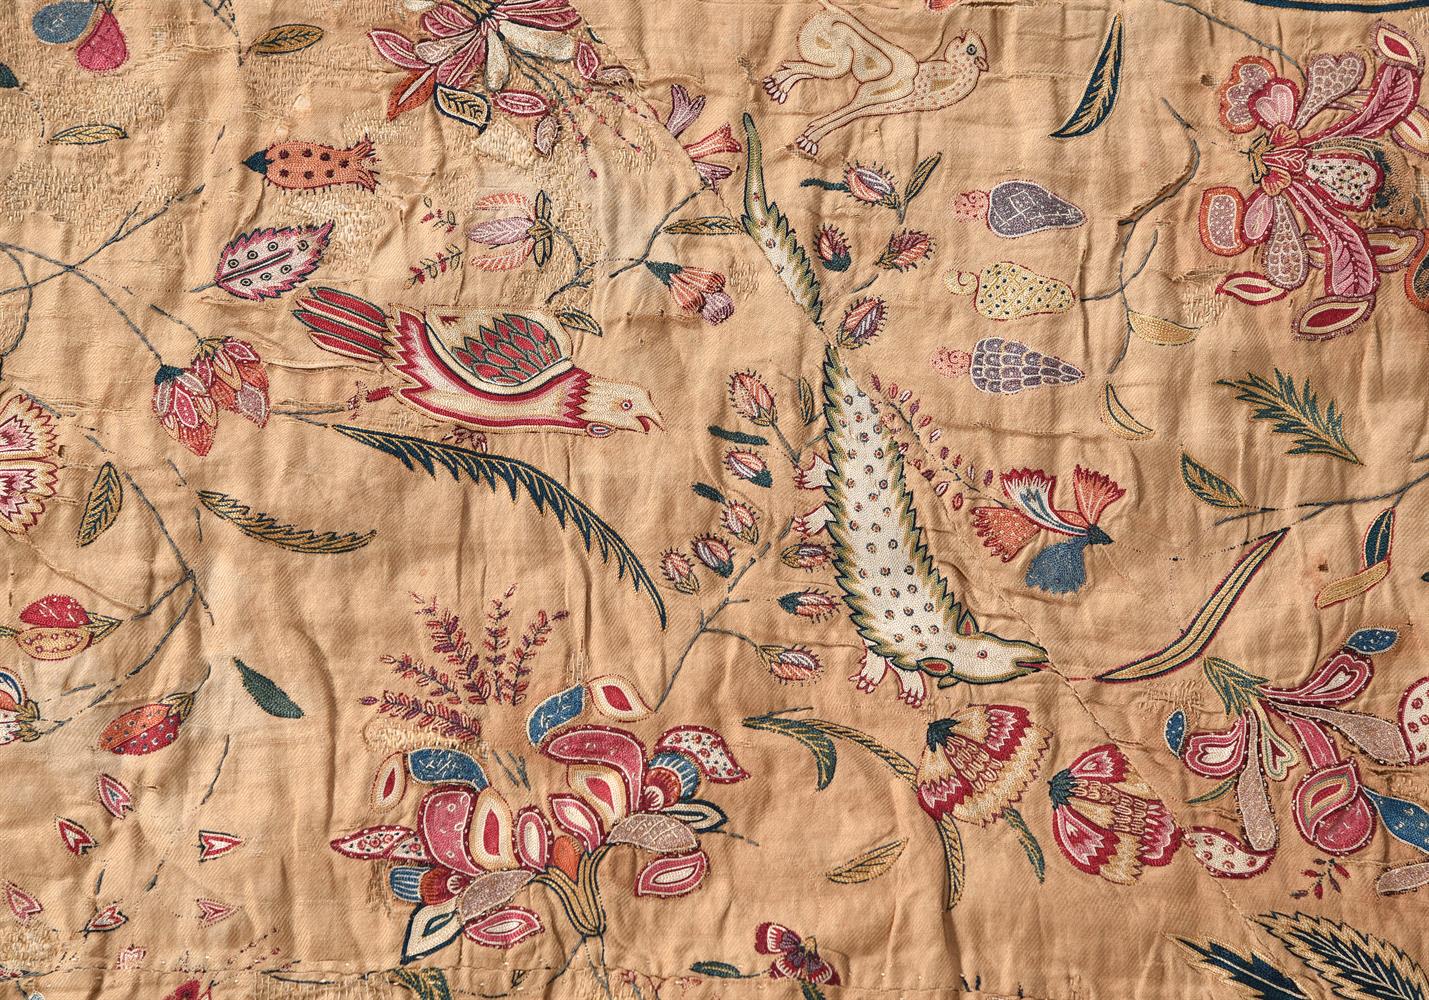 A FINELY EMBROIDERED MUGHAL SUMMER CARPET OR FLOOR SPREAD, INDIAN, 18TH/19TH CENTURY - Image 4 of 6